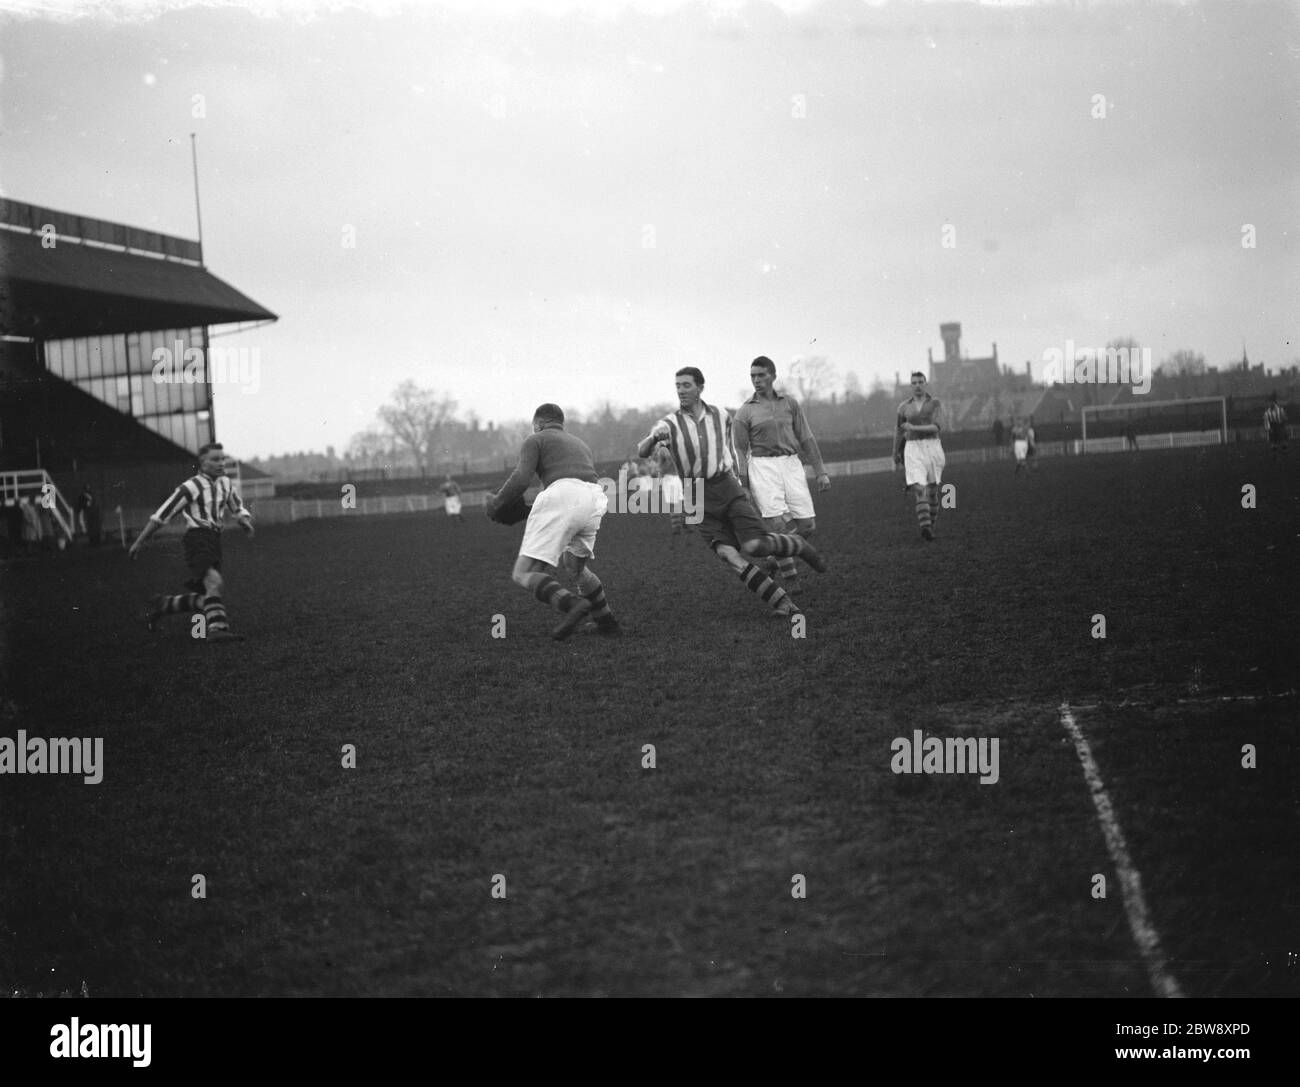 Dartford vs. Tunbridge Wells Rangers - Southern League Mid Week Section - Tunbridge Wells Rangers goalkeeper Jackie Mittell gathers the ball under pressure from Dartford's Ernie Parker - 25/03/39 Action from the game . 4 March 1939 Stock Photo